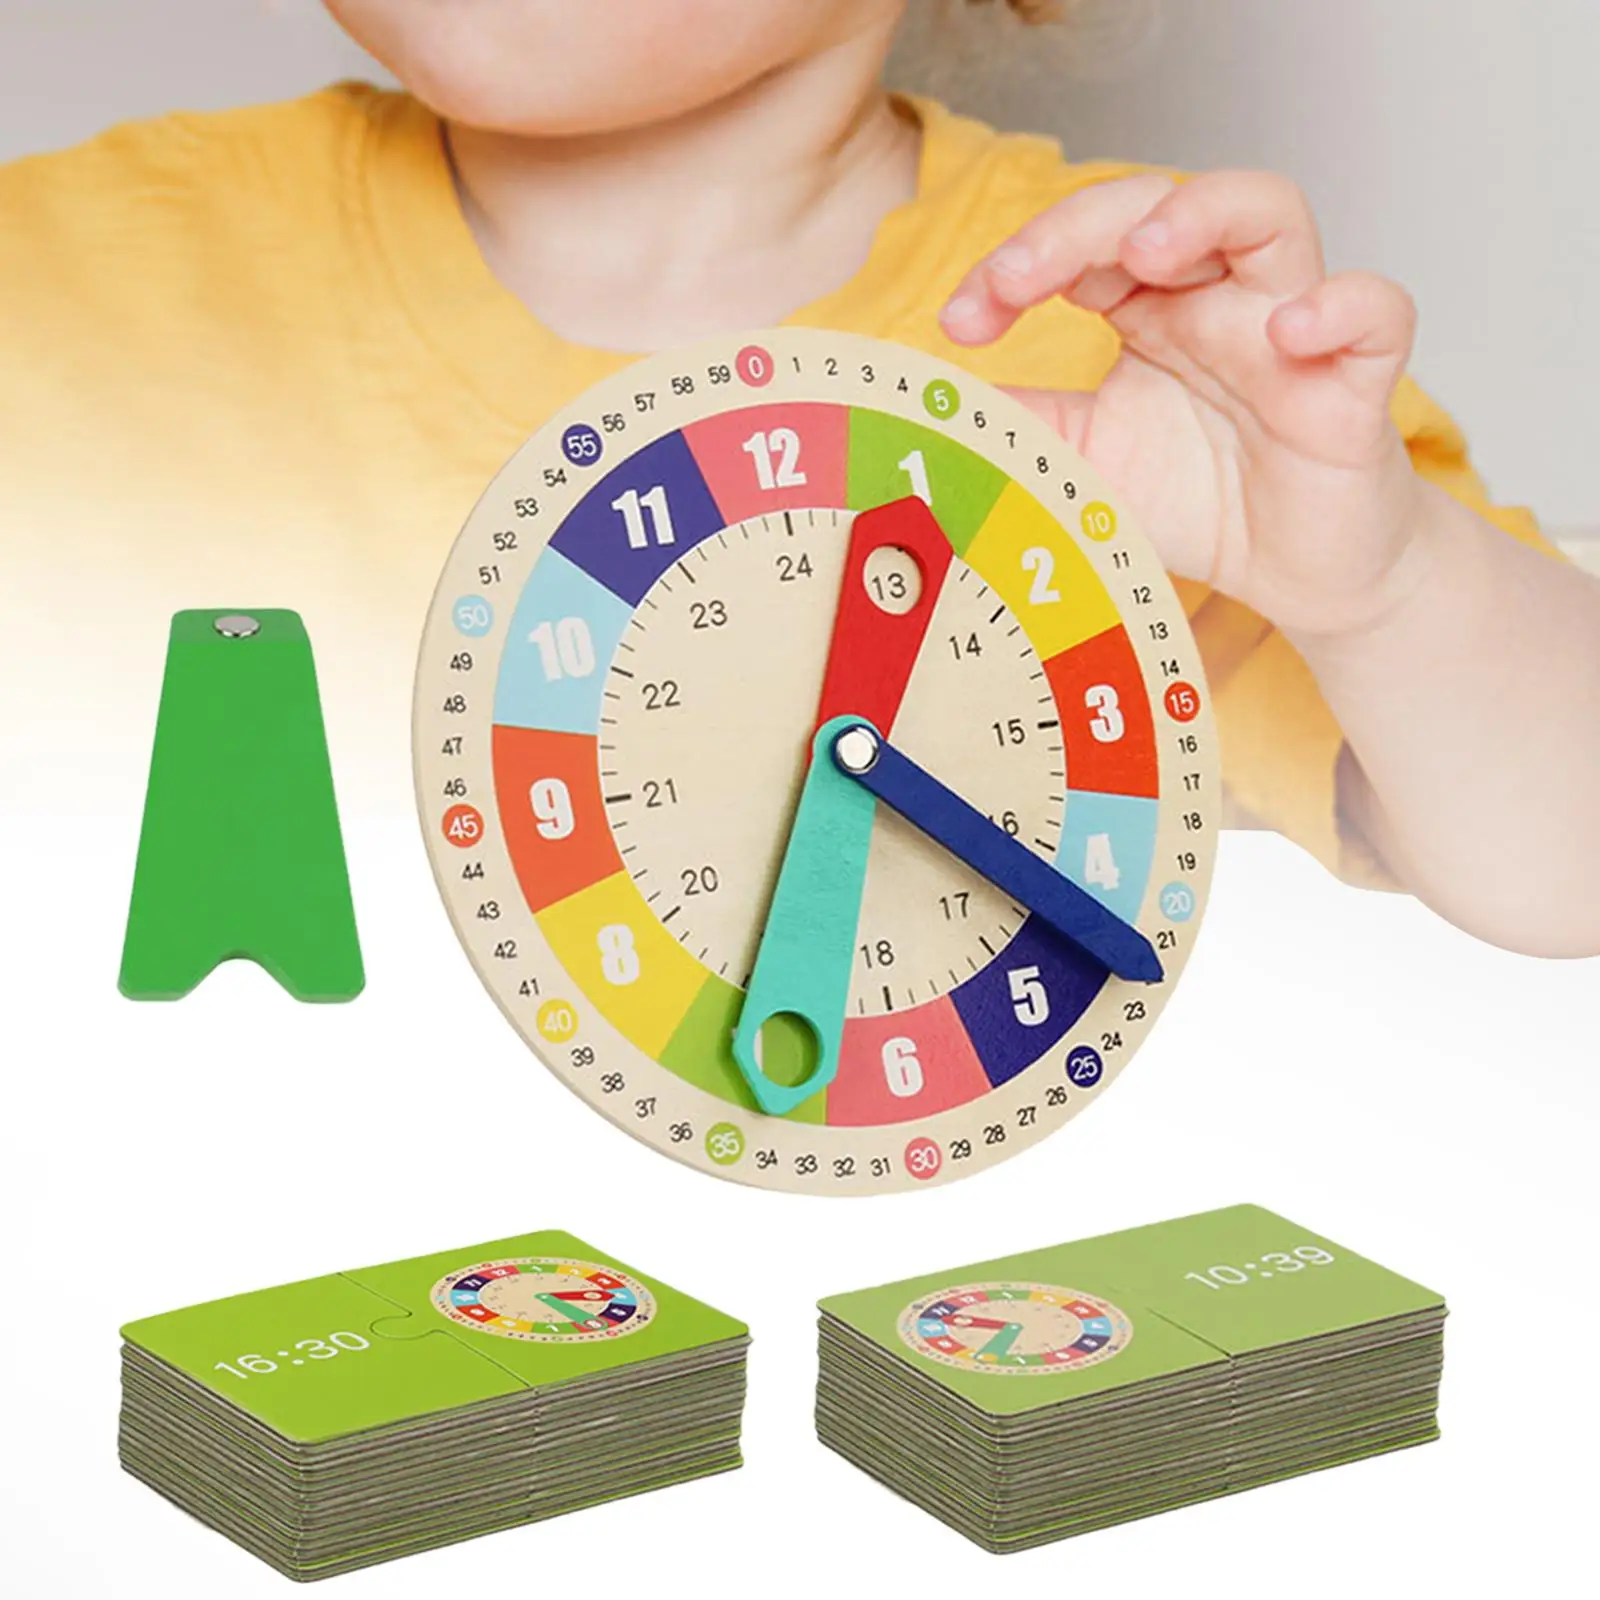 Portable Wooden Clock Kids Toys Educational Toy for Homeschool Children Baby